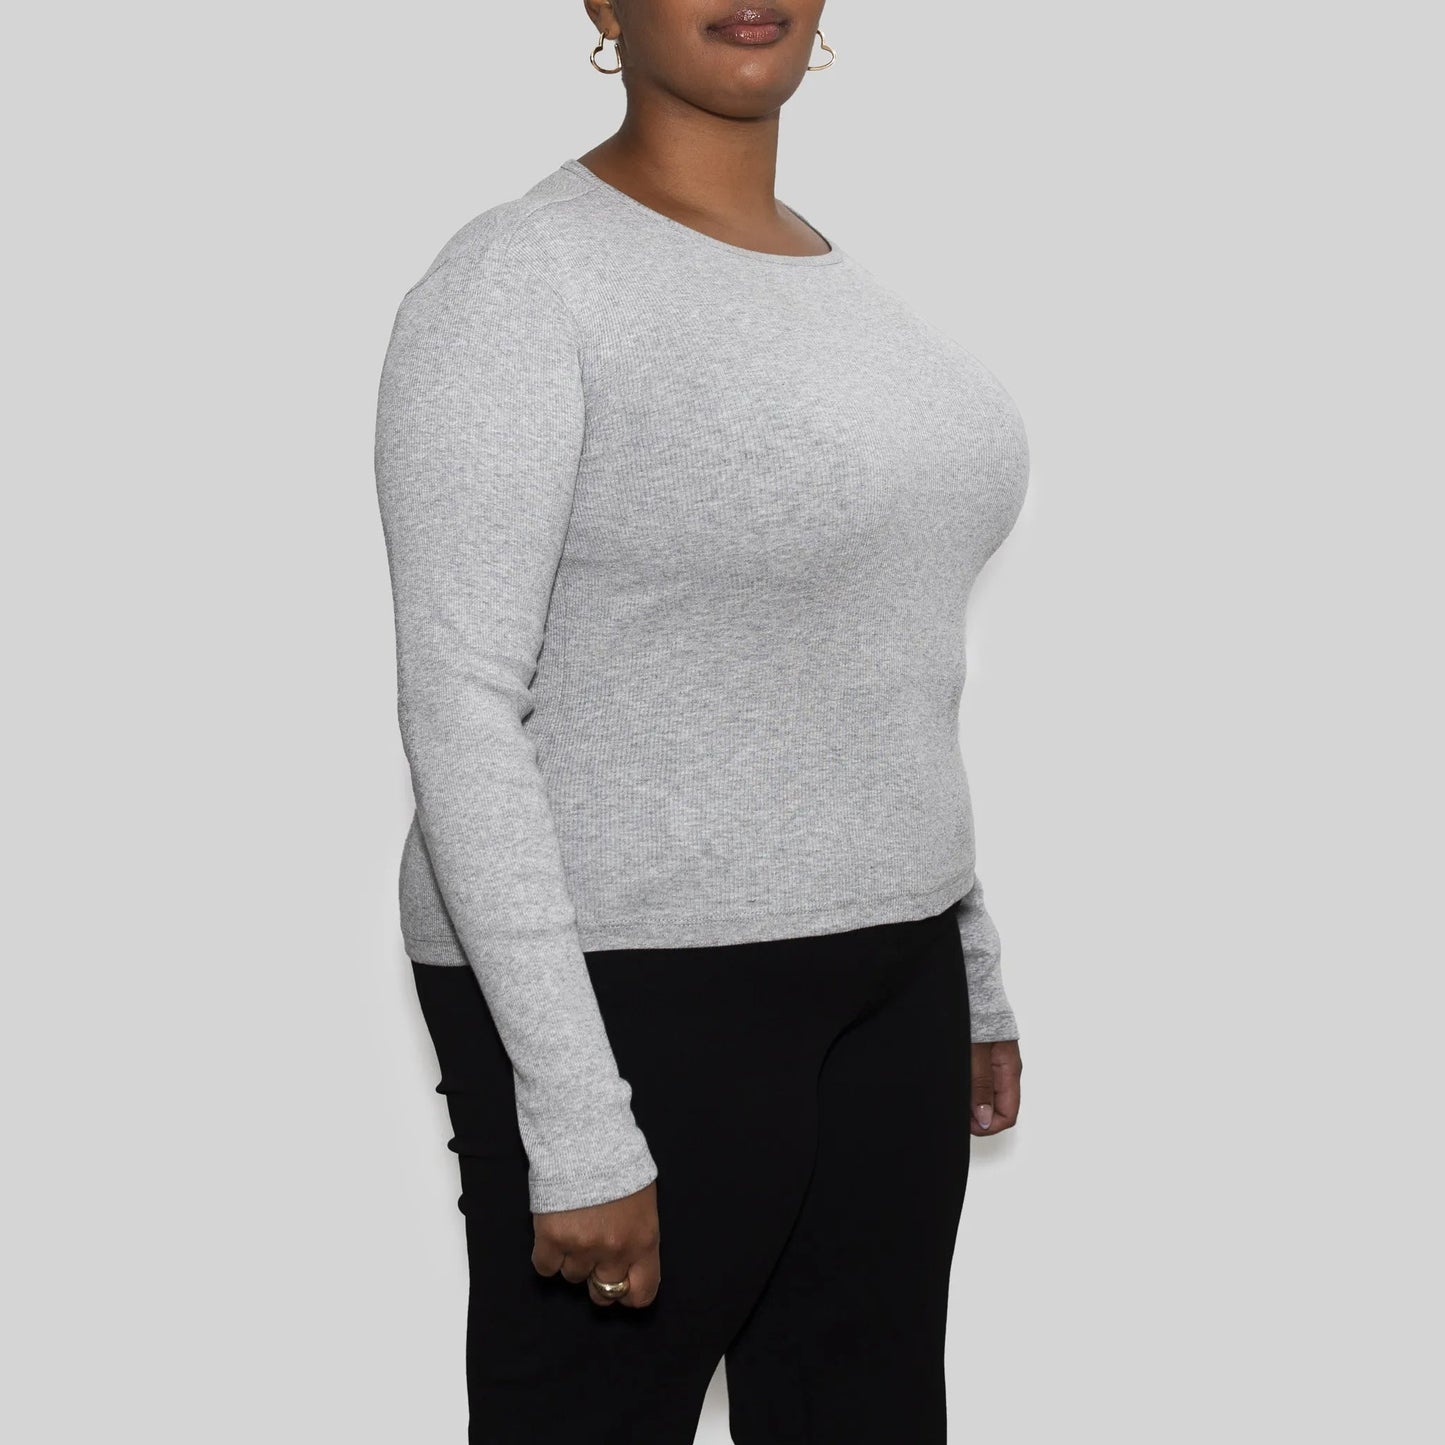 Dames gerecycled Cotton Rib Long Sleeve Top, Heather Grey